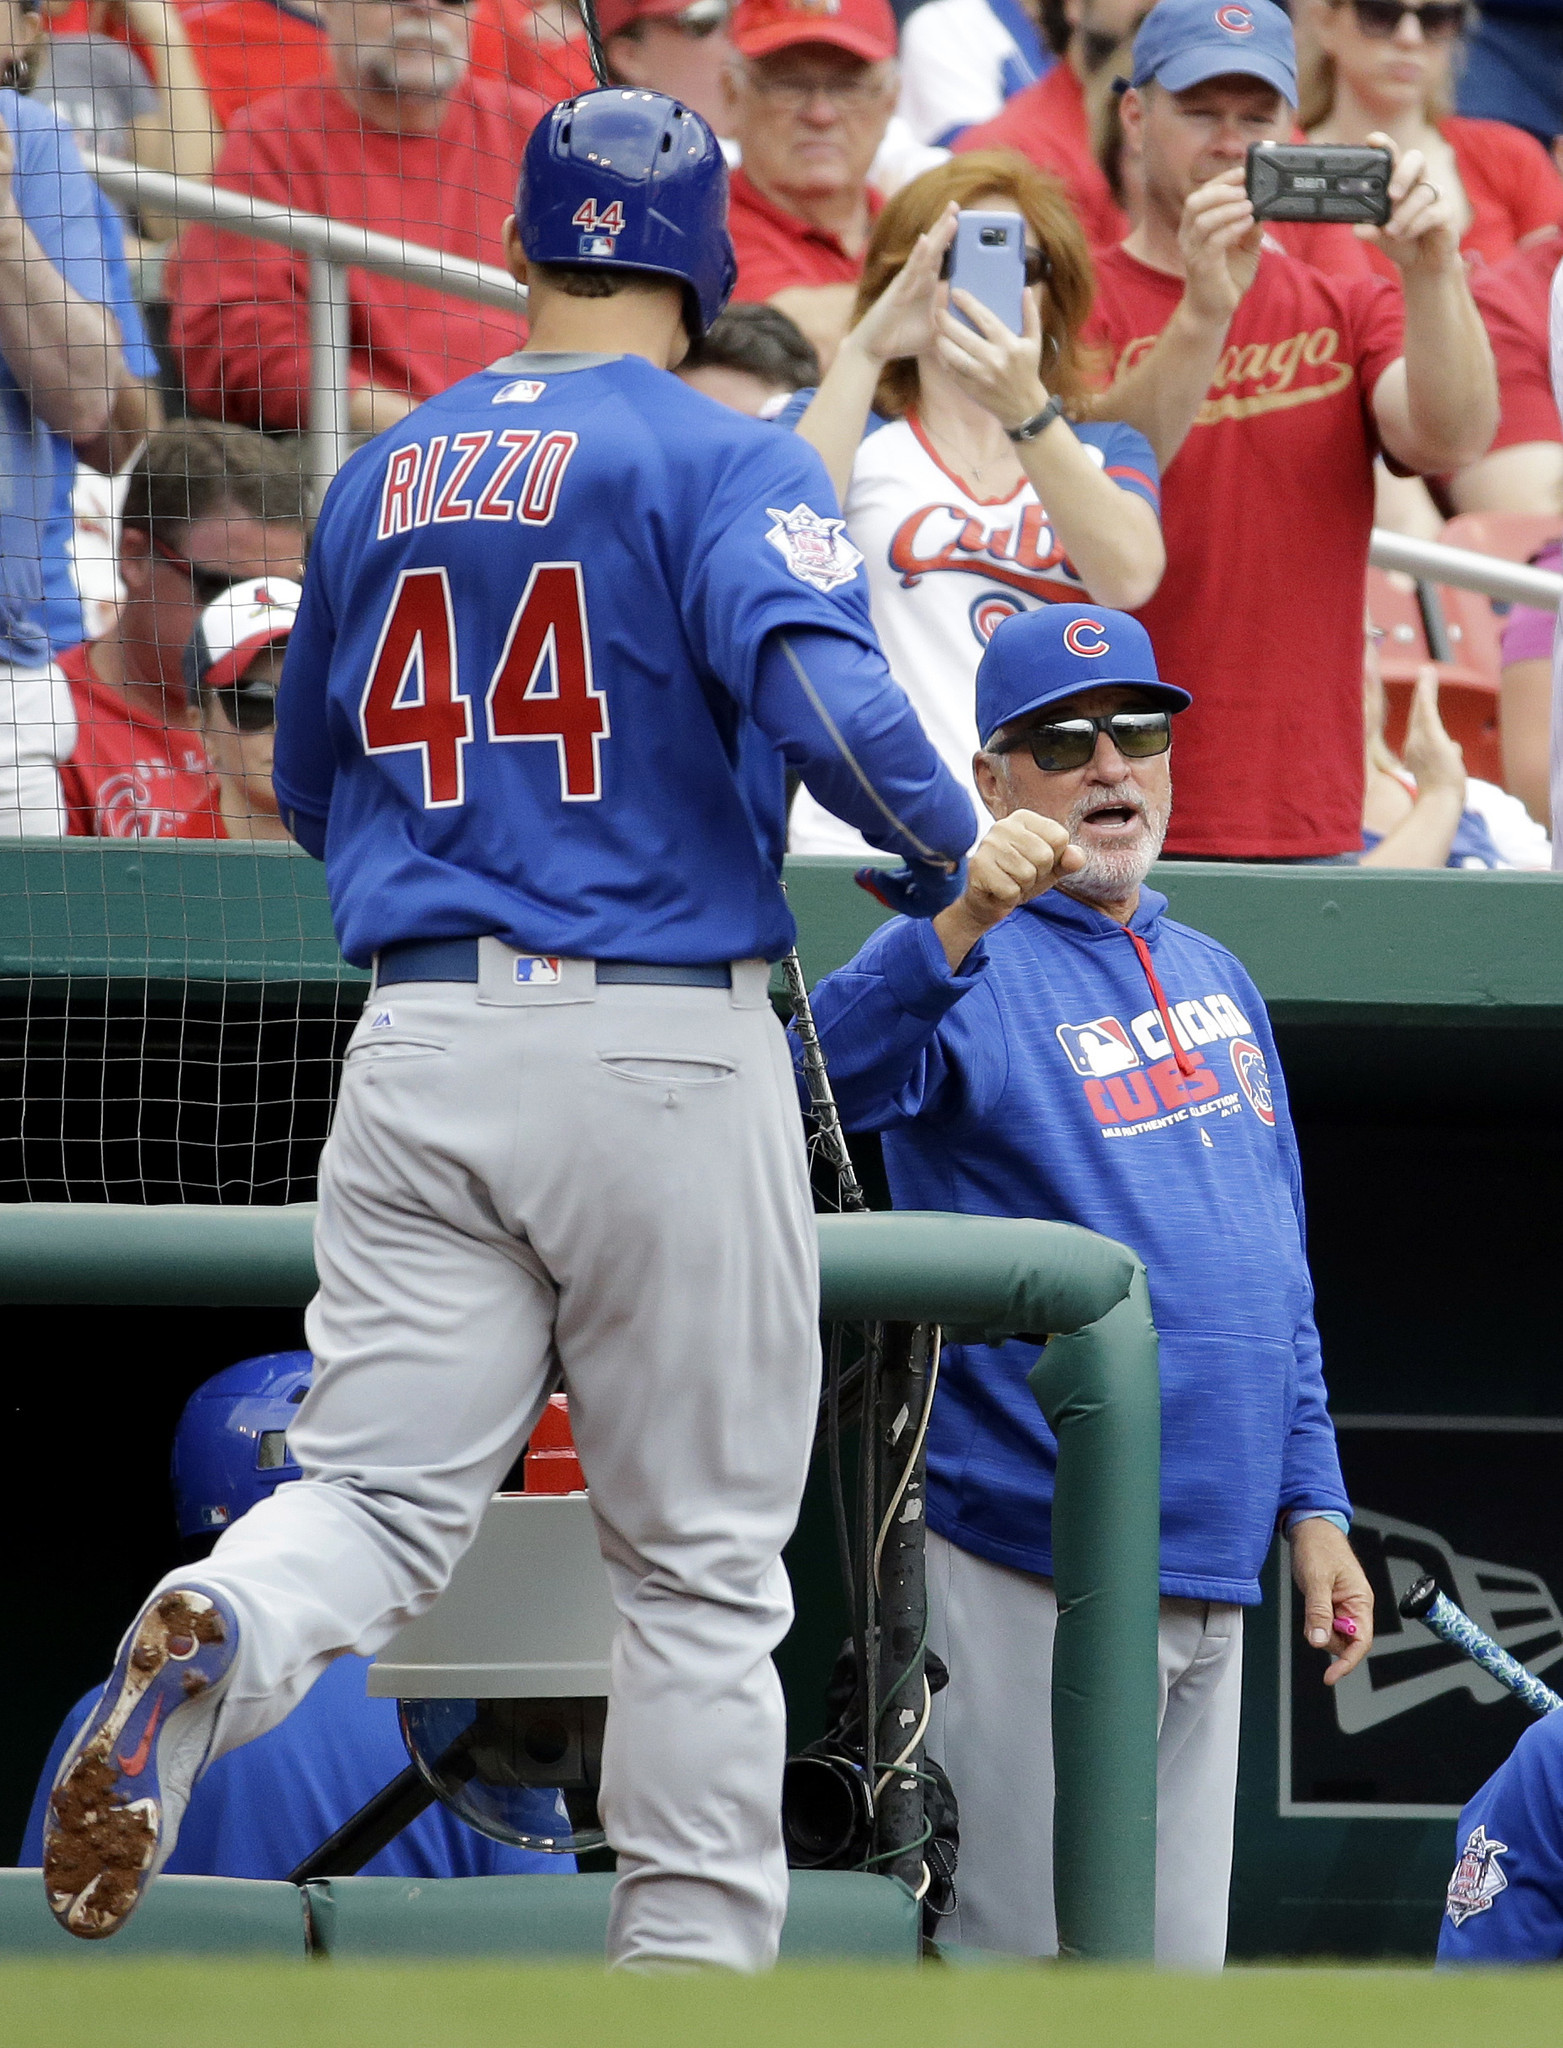 Cubs-Cardinals rivalry moves into a new era - Chicago Tribune